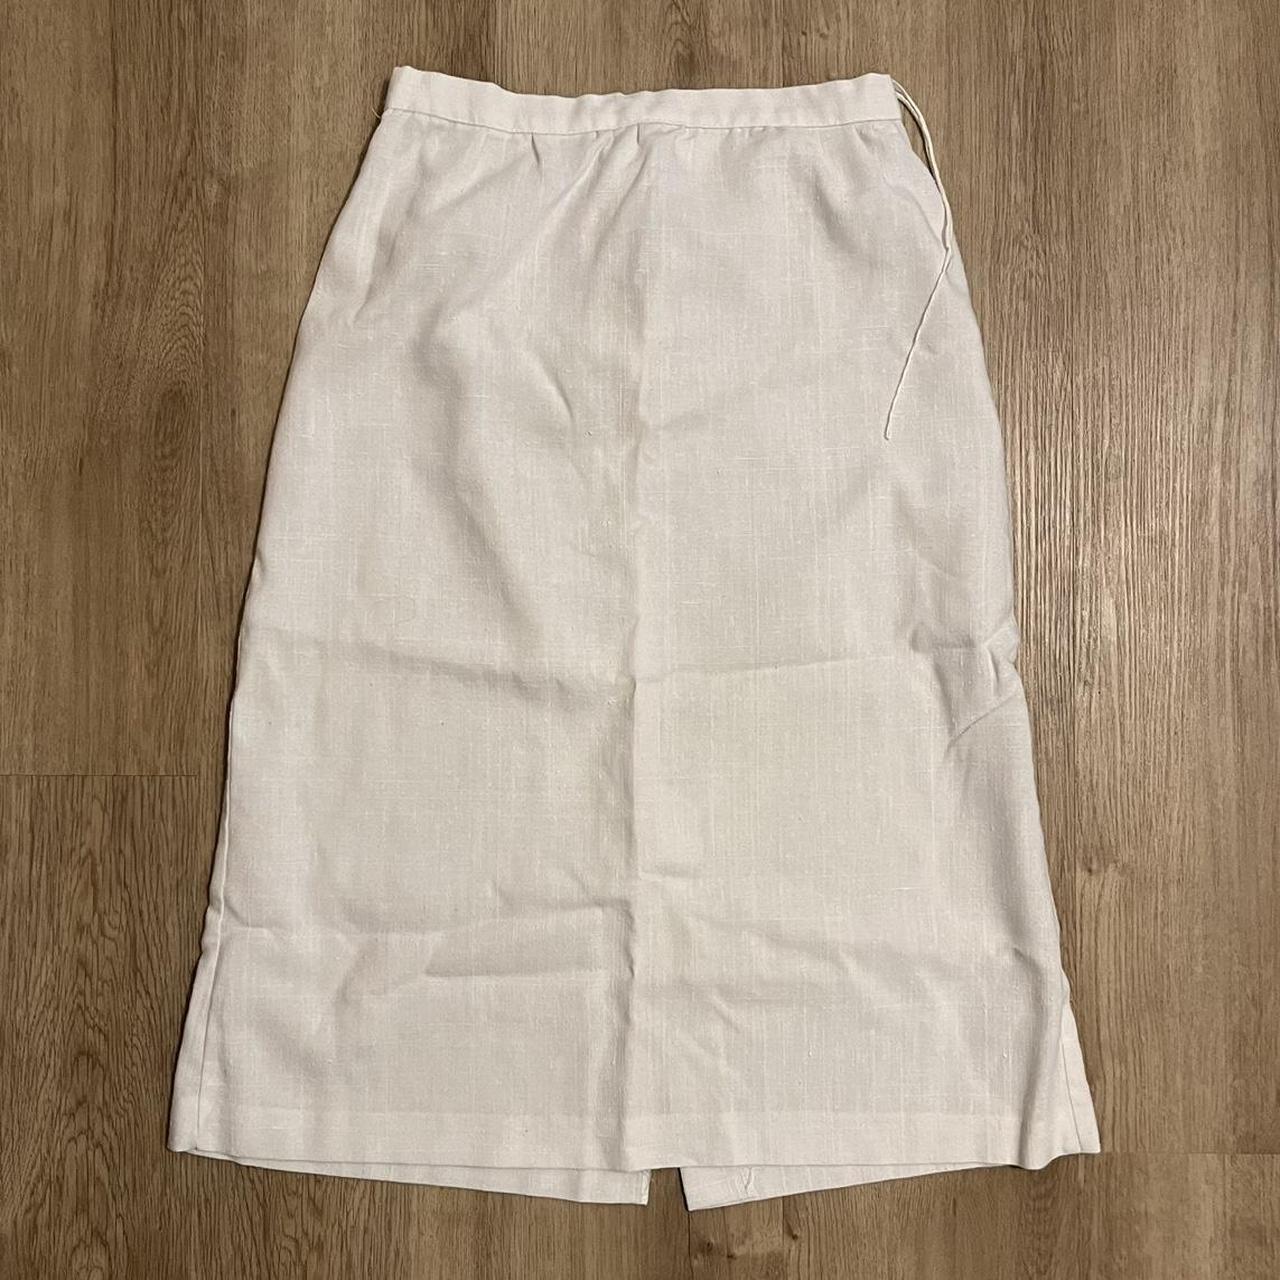 White mid length linen skirt, no stains, rips, or... - Depop